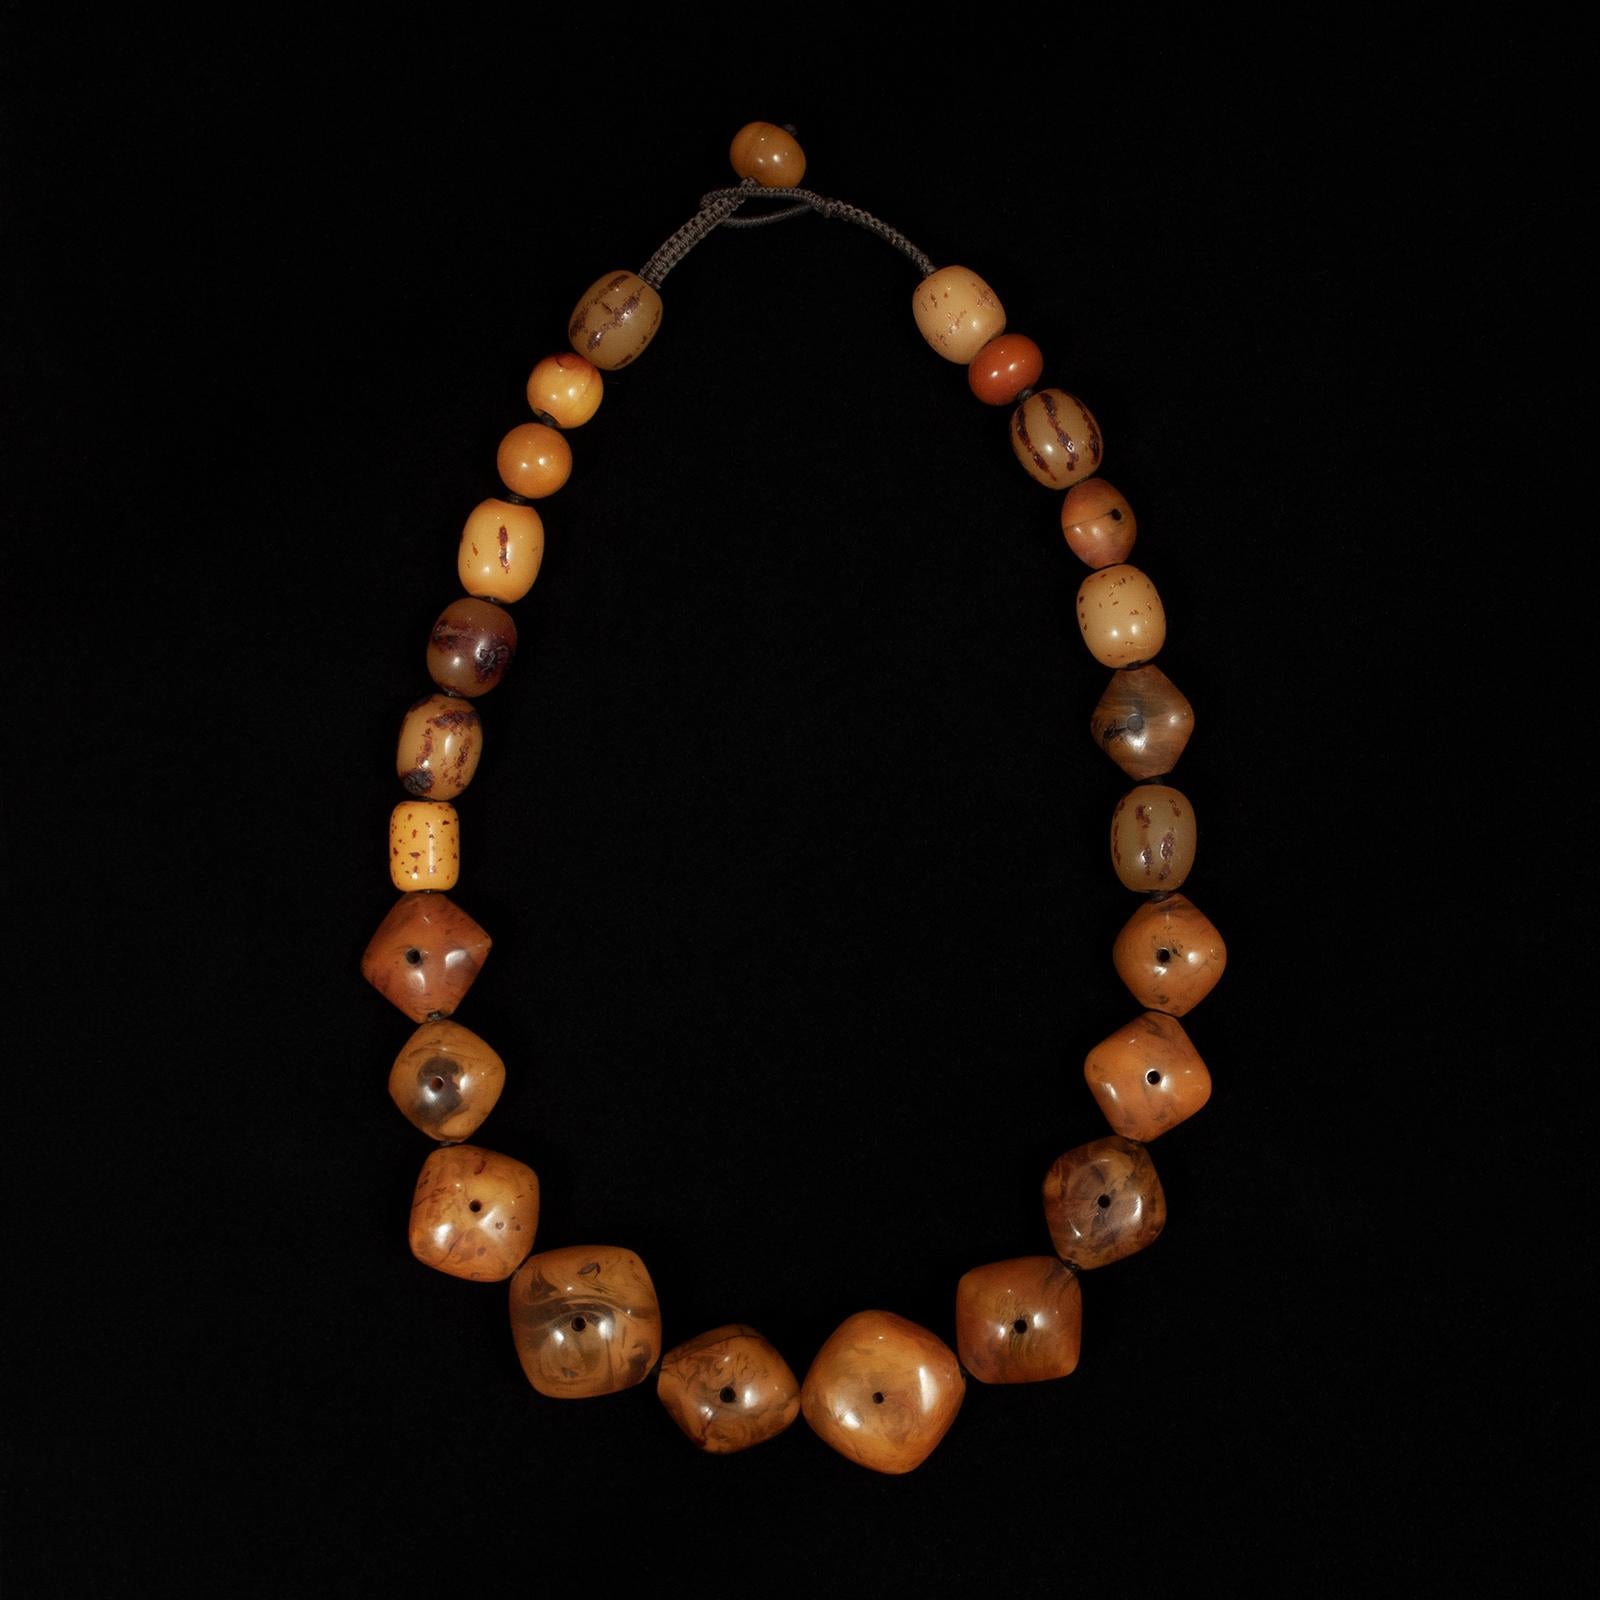 “African amber” (phenolic resin) necklace by unknown designer

This striking necklace is made with smooth old African 